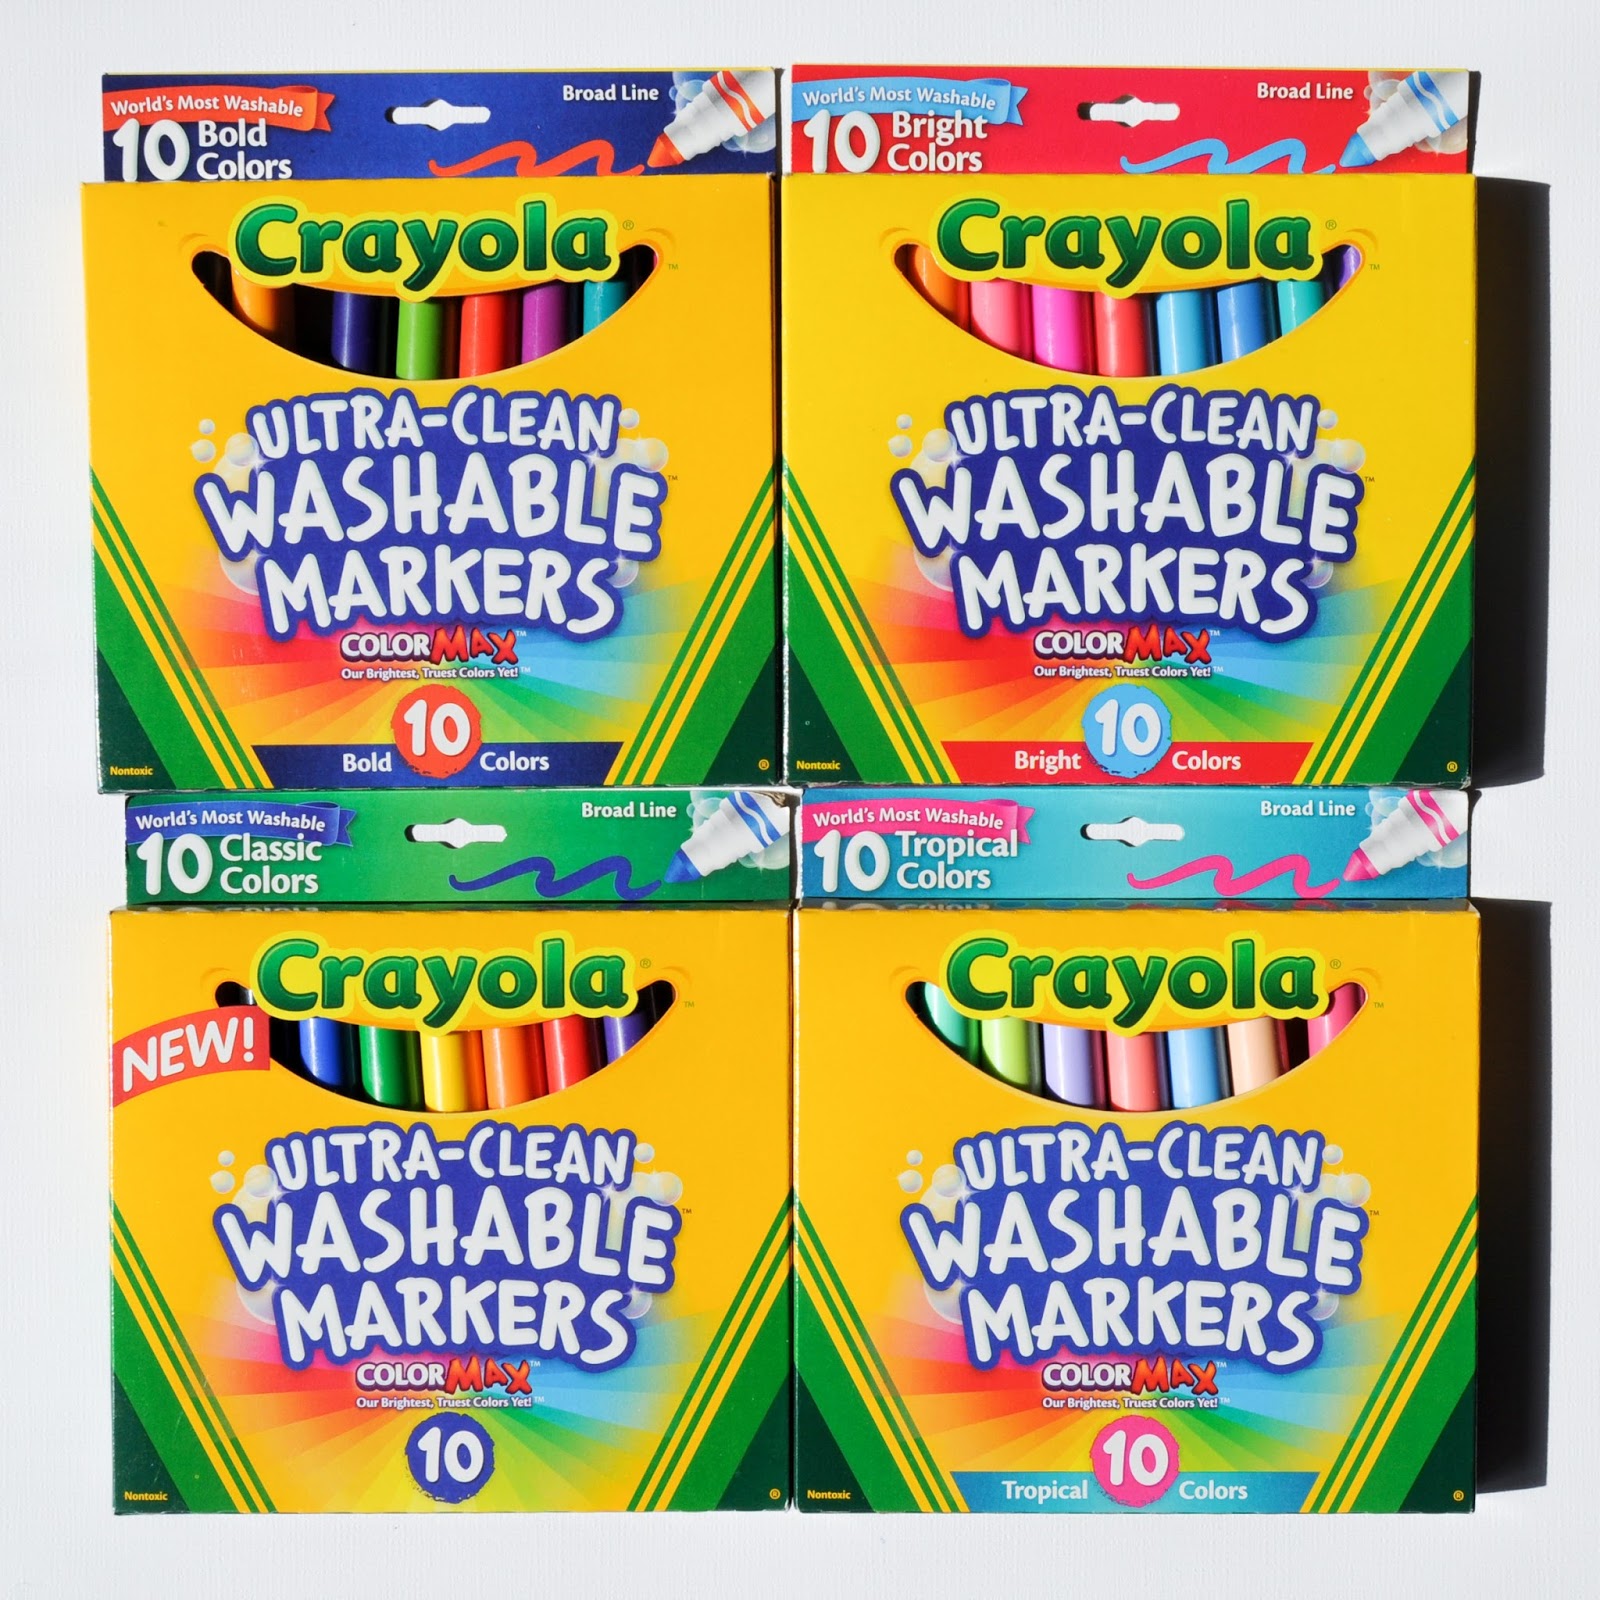 Crayola Ultra-Clean Washable Markers Color MAX: What's Inside the Box